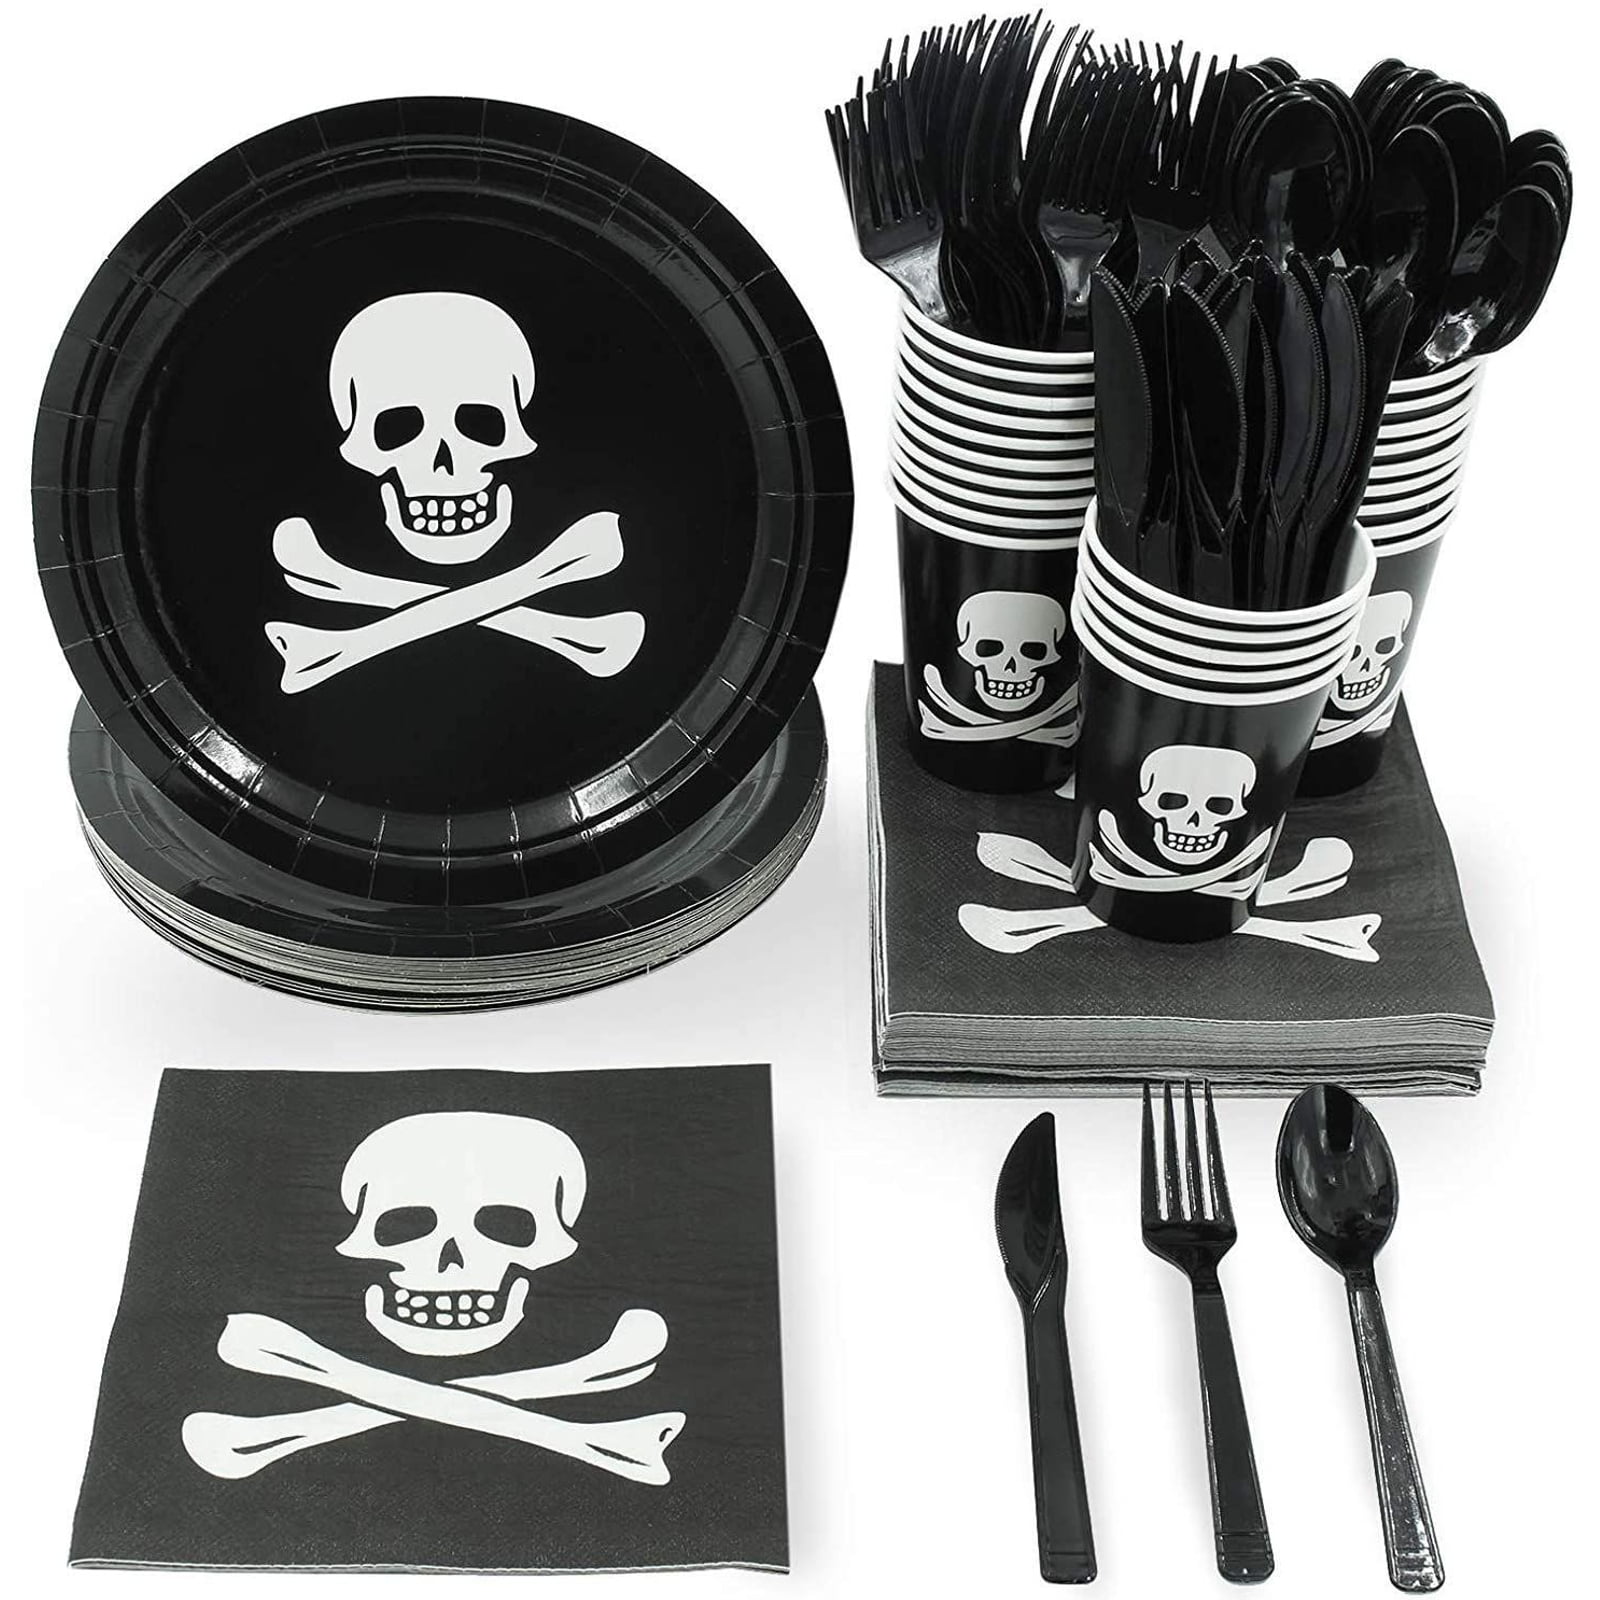 12 Piece PIRATE Yo Ho Yo Ho Birthday Cake Topper Set Featuring Random Pirate Figures and Decorative Themed Accessories 